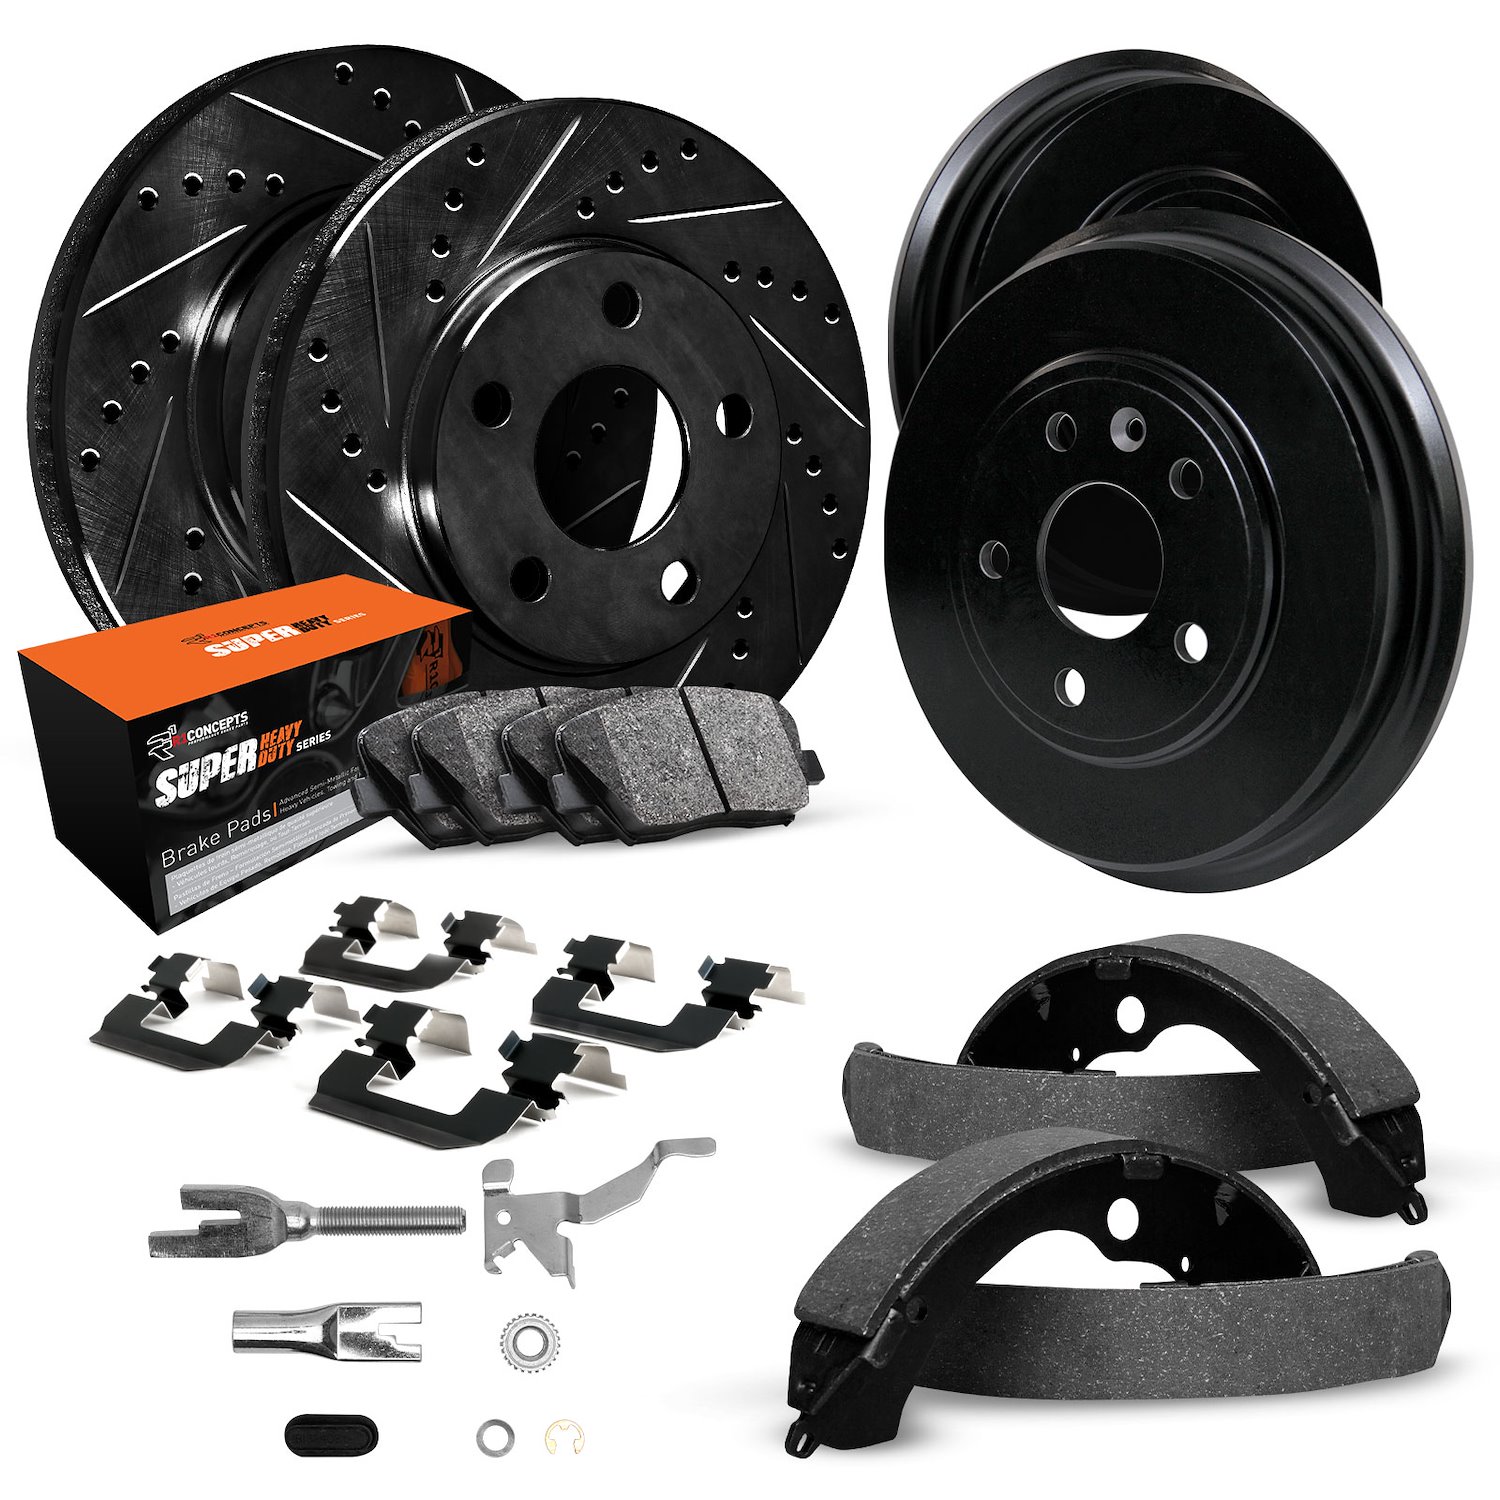 E-Line Drilled/Slotted Black Rotor & Drum Set w/Super-Duty Pads, Shoes, Hardware/Adjusters, 2003-2009 Ford/Lincoln/Mercury/Mazda